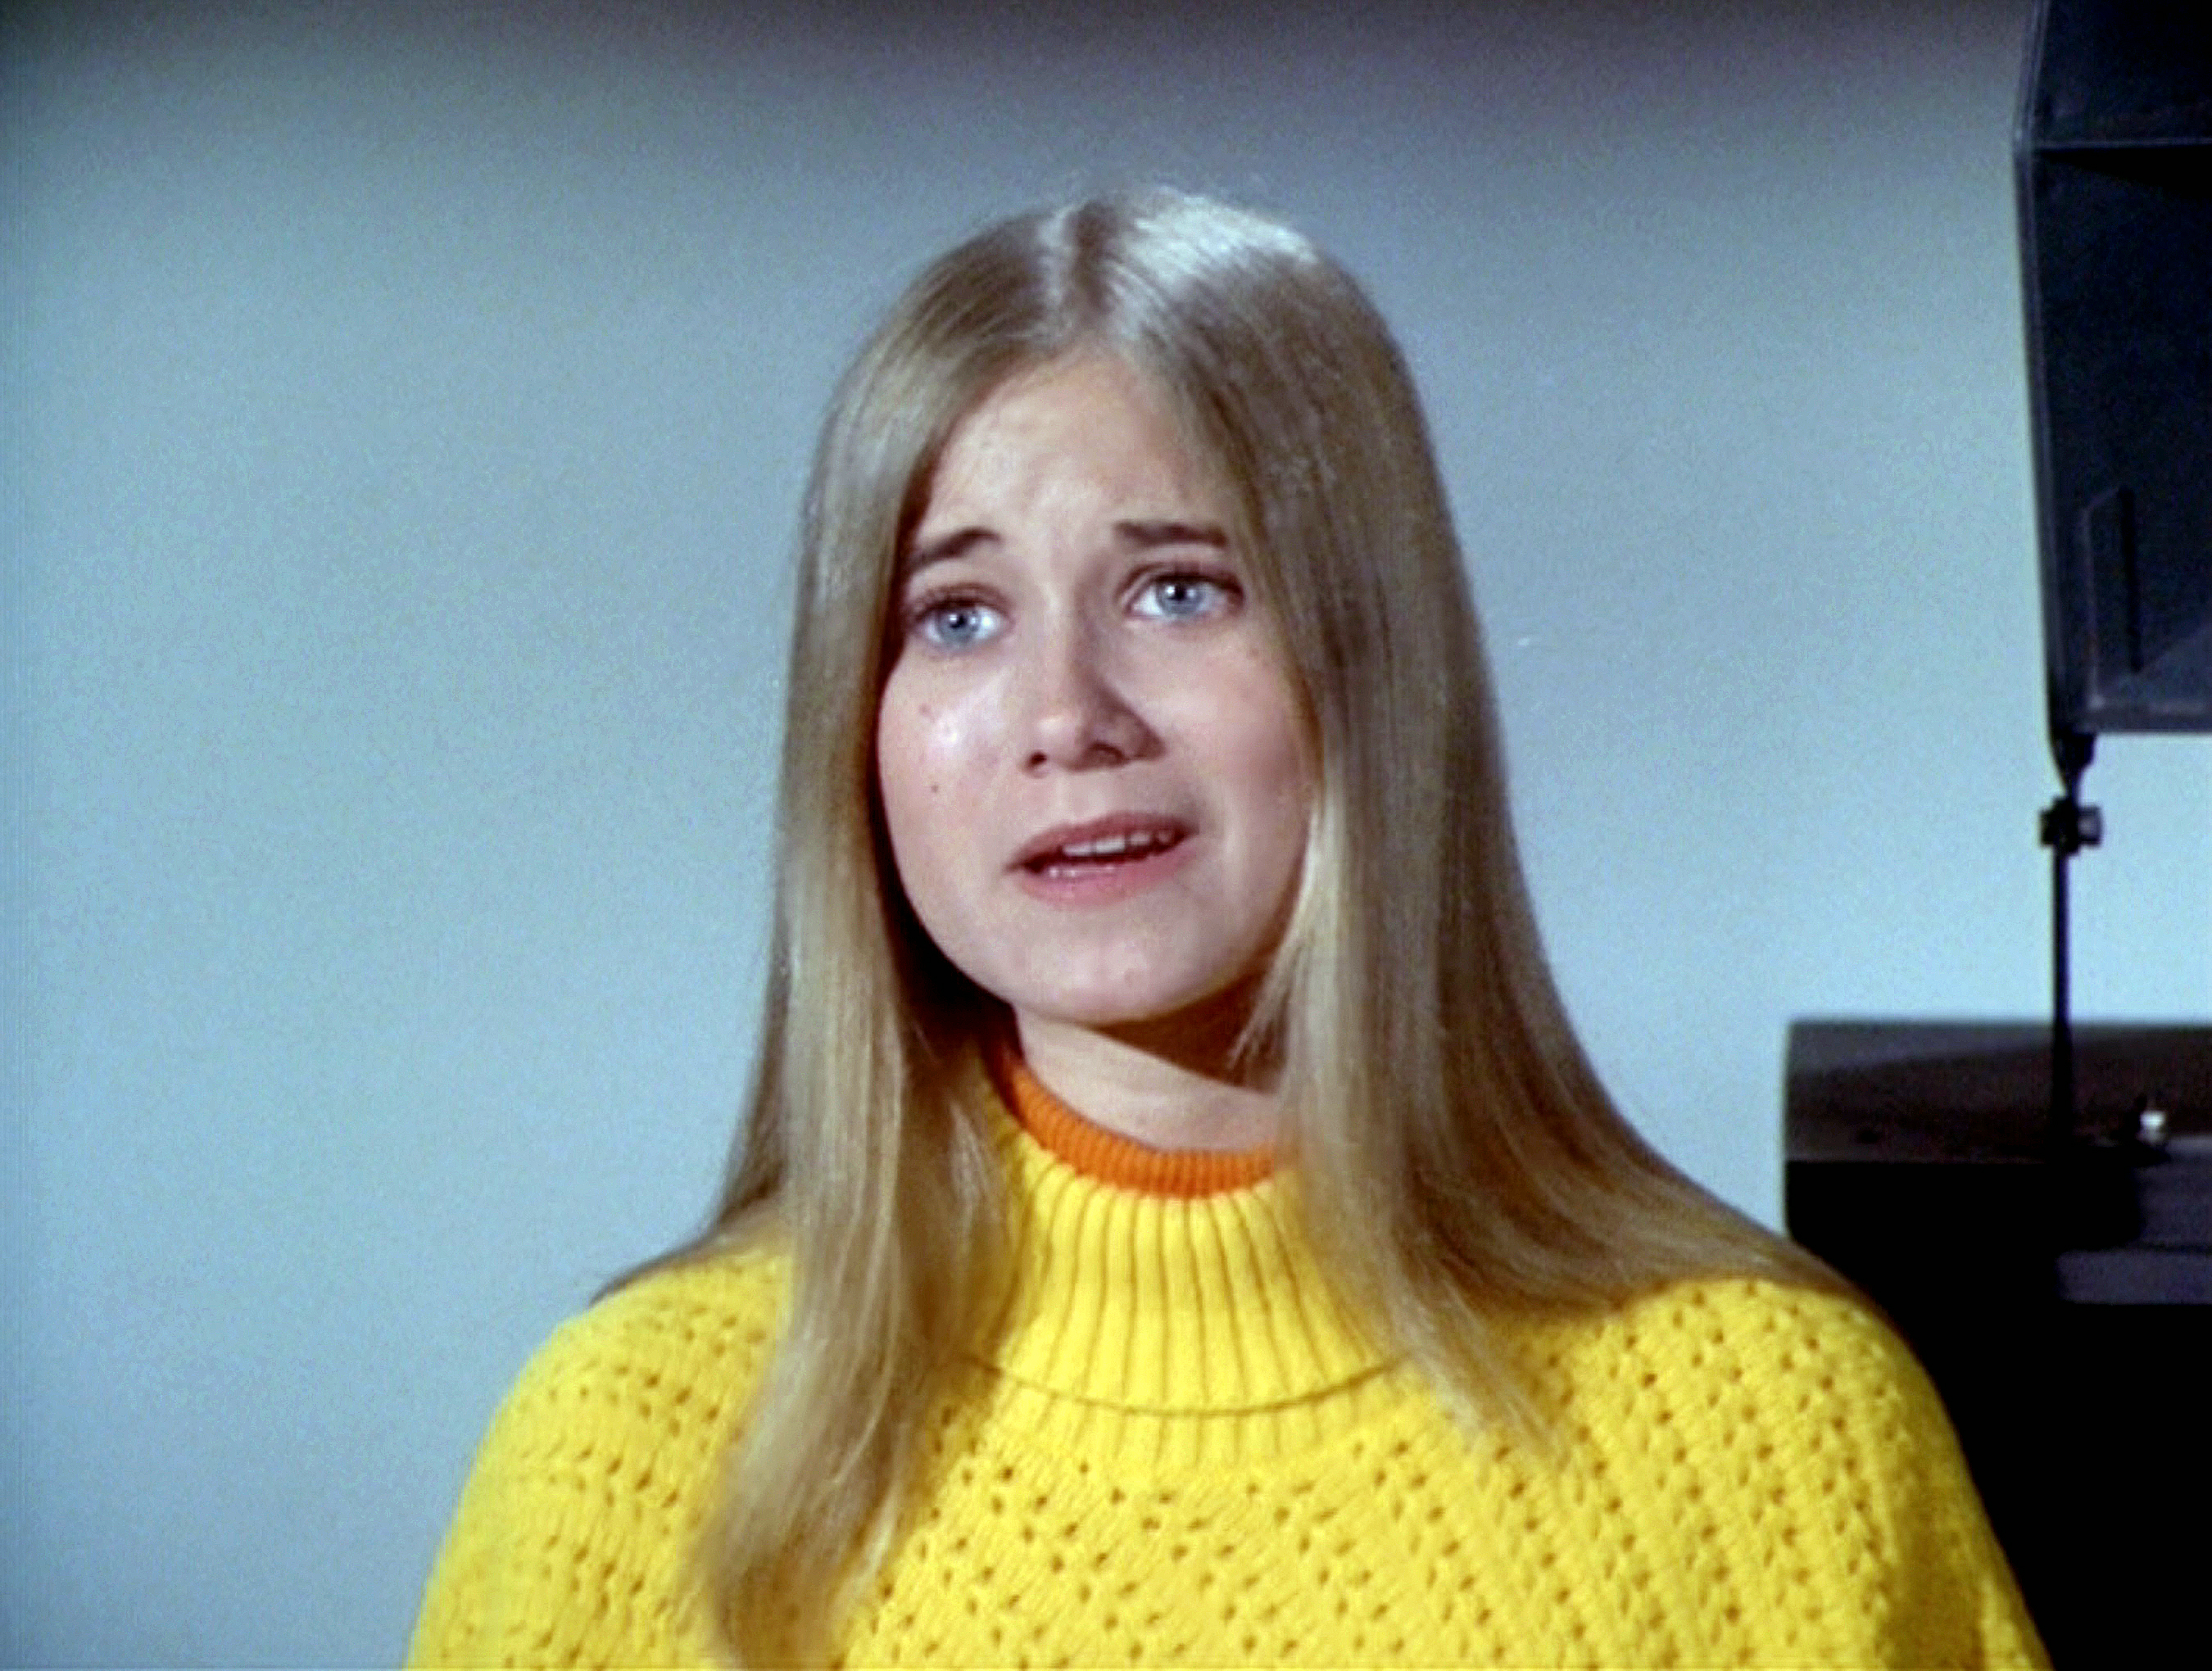 Maureen McCormick playing Marcia Brady in the "Getting Davy Jones" episode of "The Brady Bunch" in Los Angeles, 1971 | Source: Getty Images